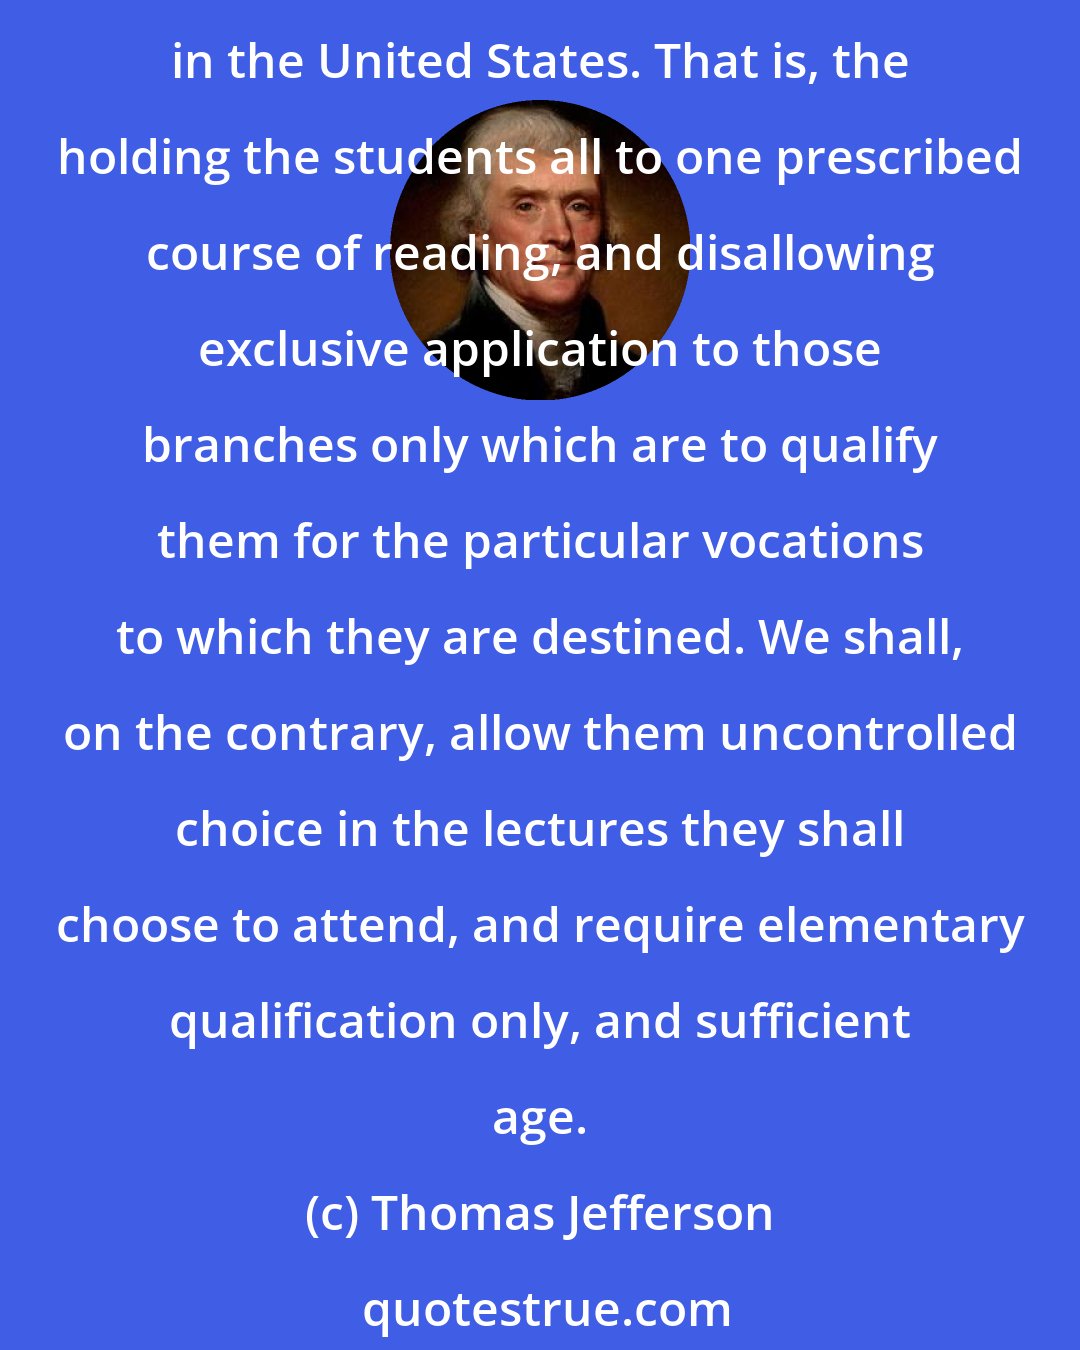 Thomas Jefferson: I am not fully informed of the practices at Harvard, but there is one from which we shall certainly vary, although it has been copied, I believe, by nearly every college and academy in the United States. That is, the holding the students all to one prescribed course of reading, and disallowing exclusive application to those branches only which are to qualify them for the particular vocations to which they are destined. We shall, on the contrary, allow them uncontrolled choice in the lectures they shall choose to attend, and require elementary qualification only, and sufficient age.